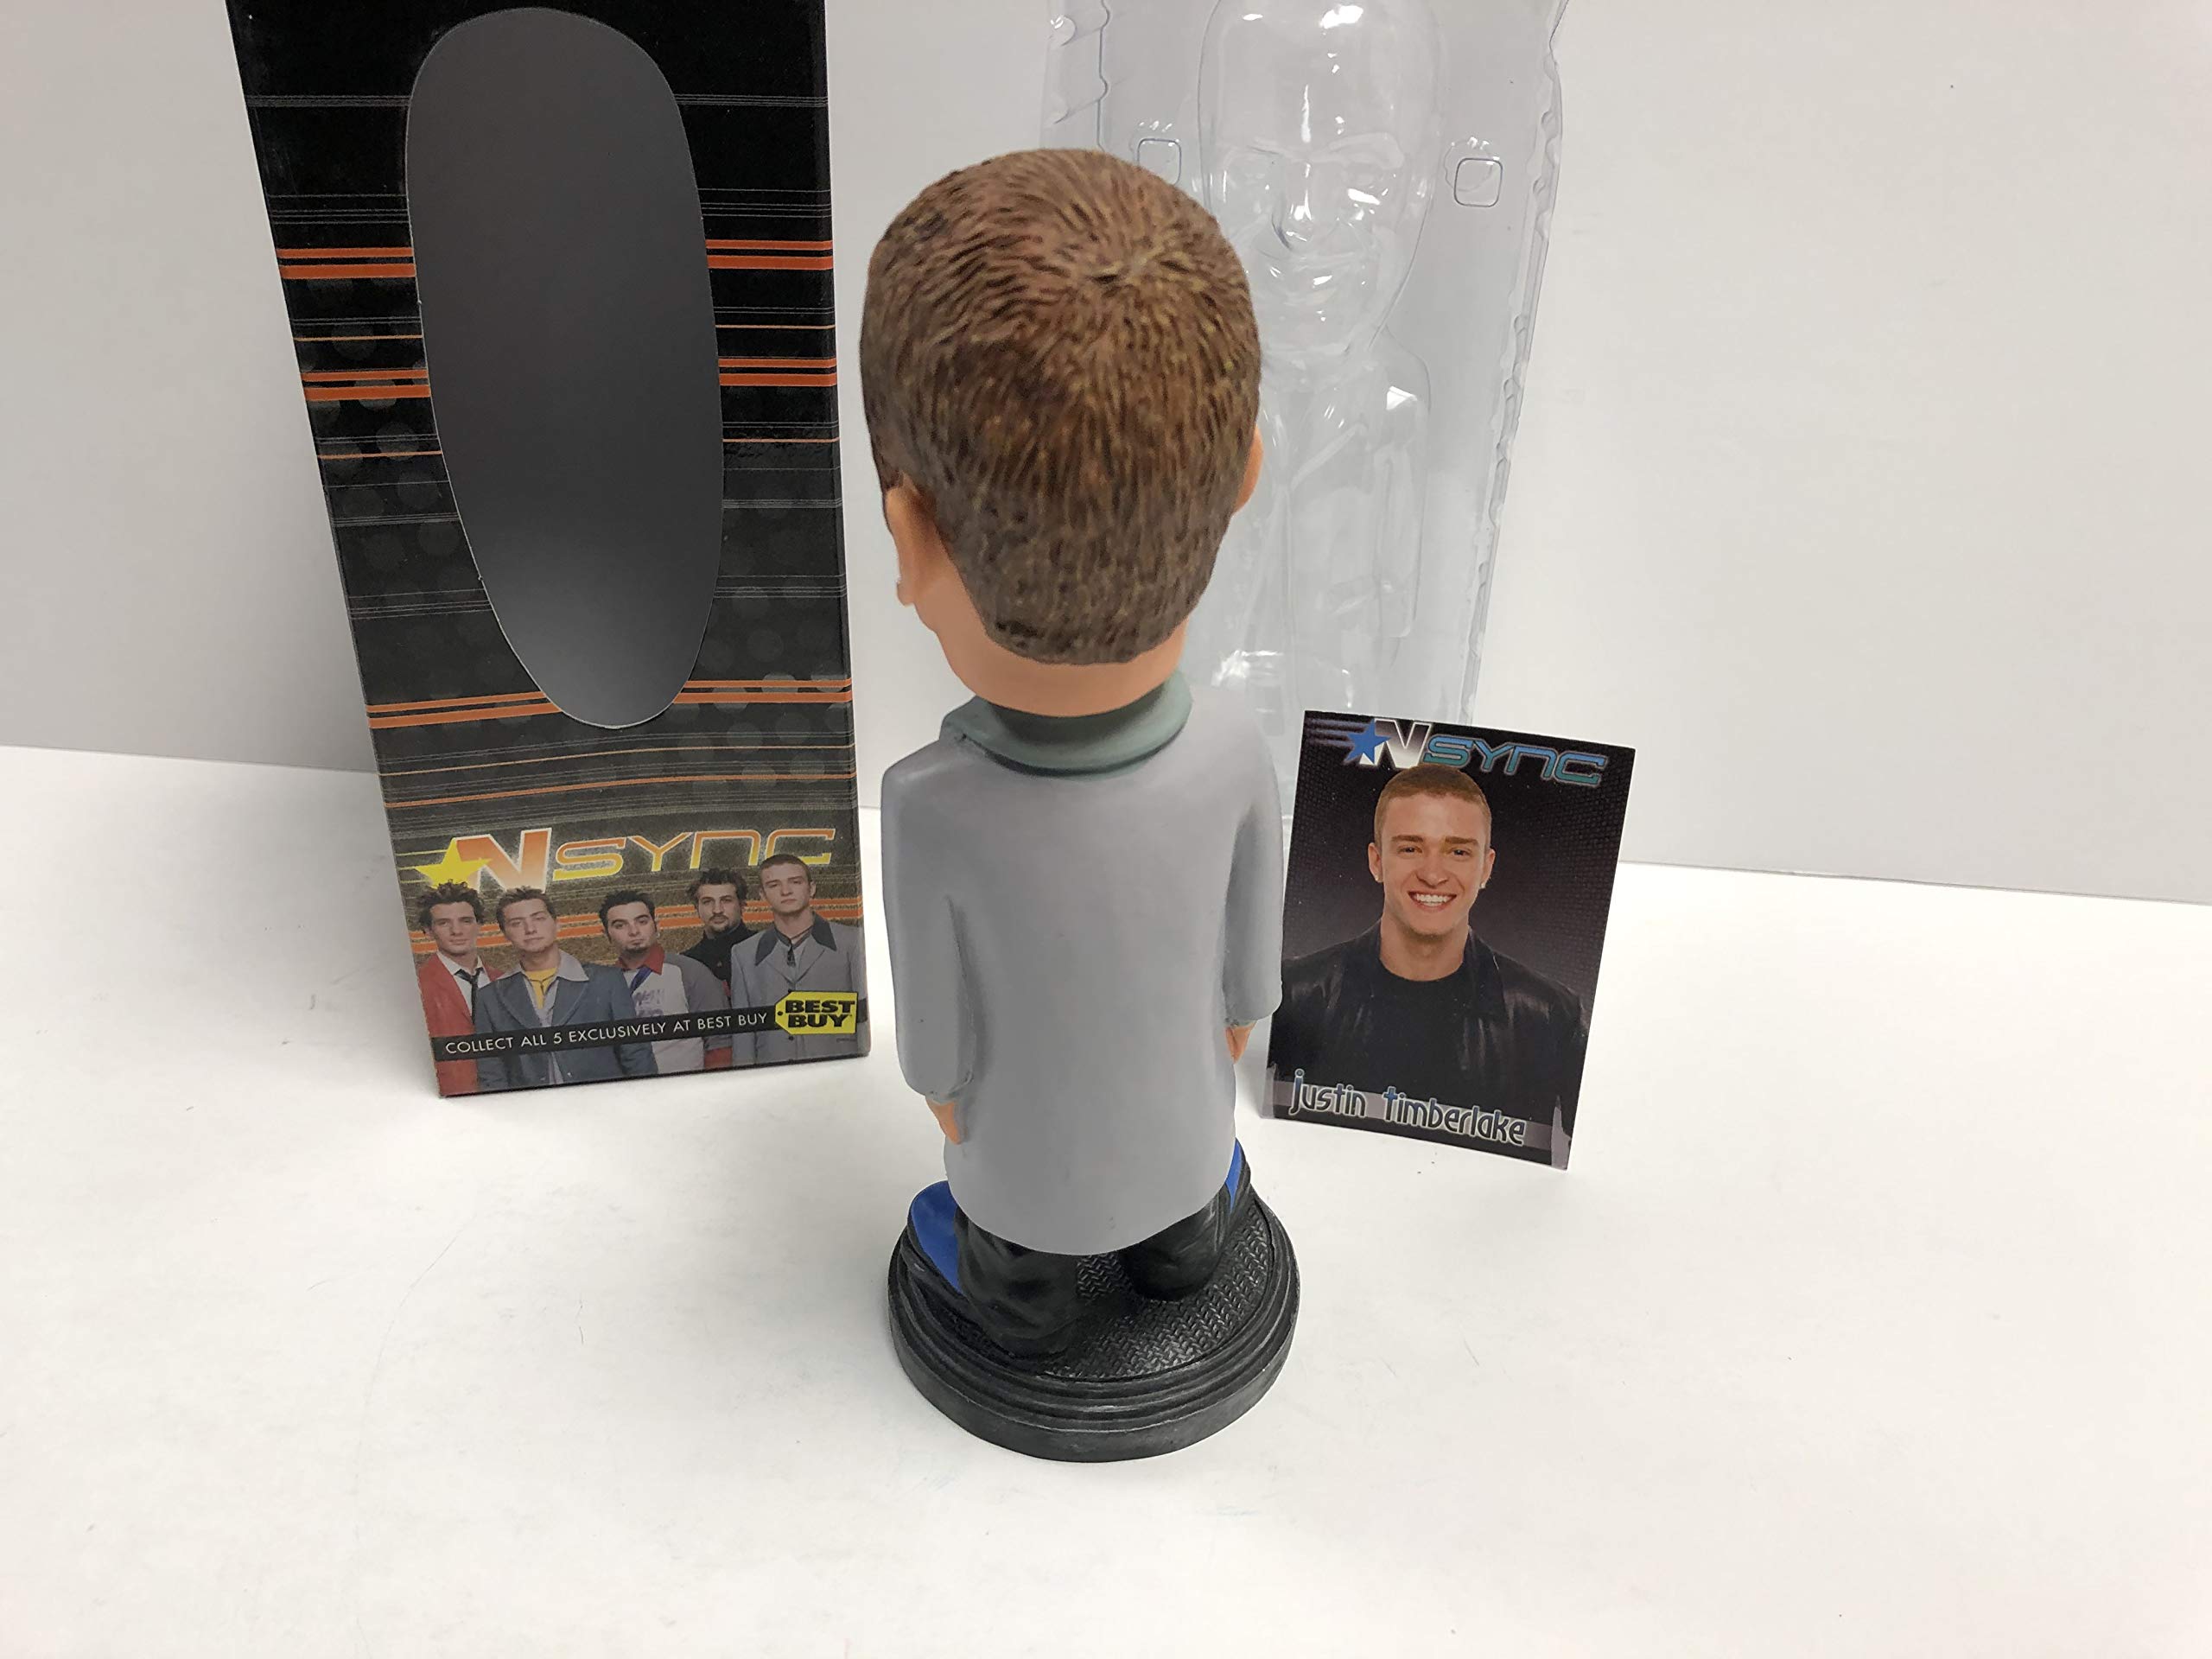 Justin Timberlake NSYNC Best BUY Promotional Bobble Bobblehead with trading card